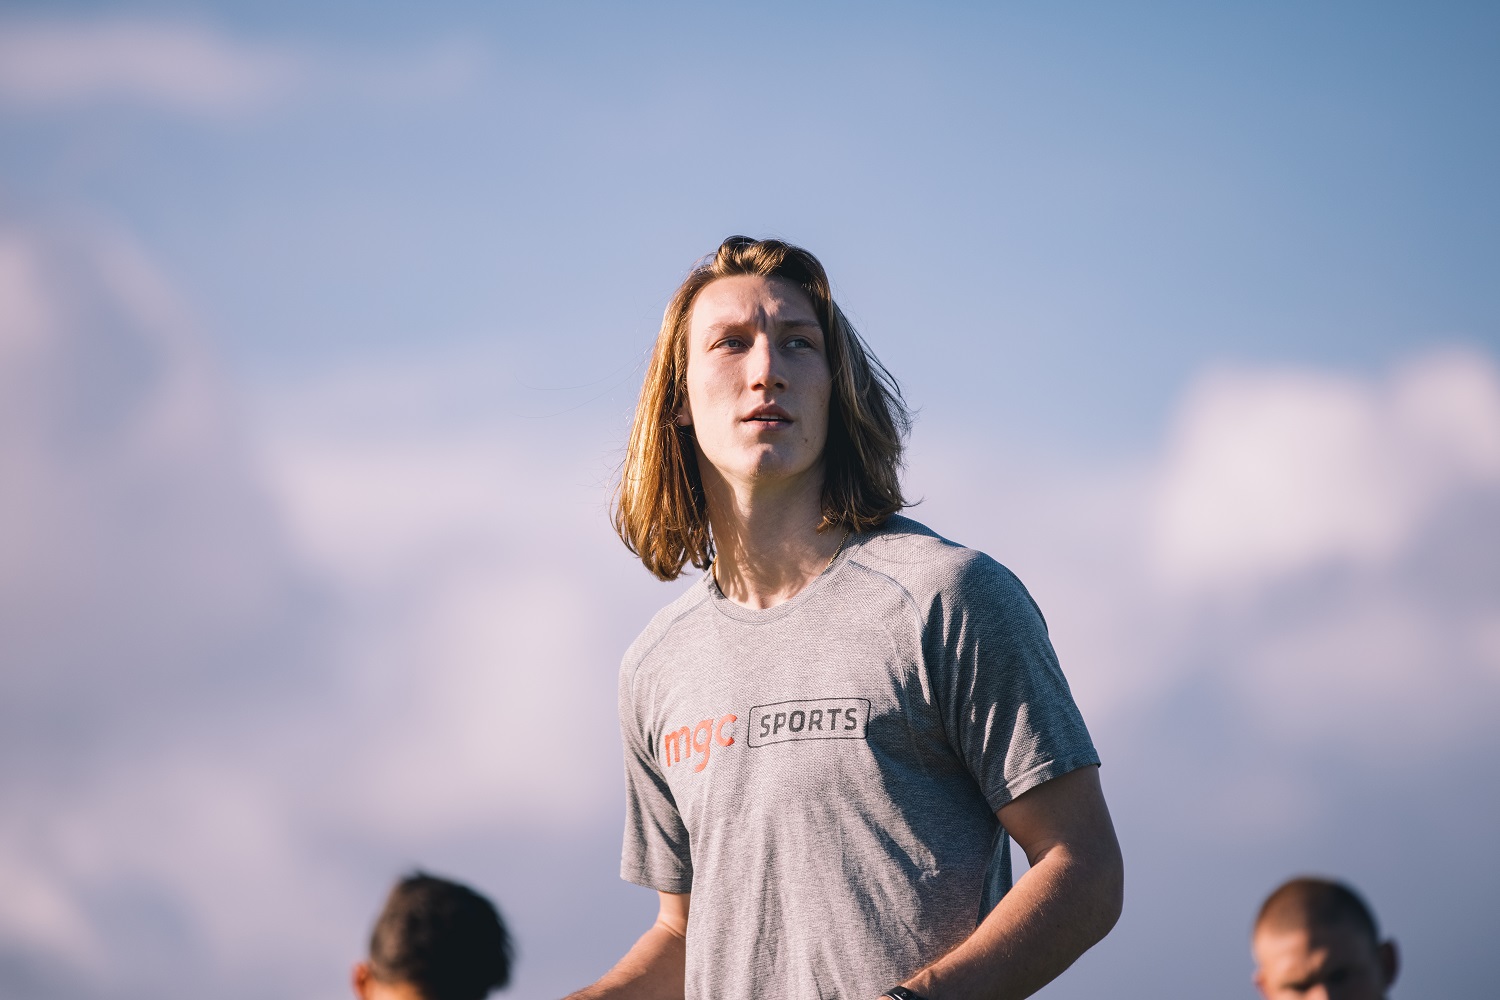 Trevor Lawrence has signed an endorsement deal with Gatorade ahead of the 2021 NFL draft.